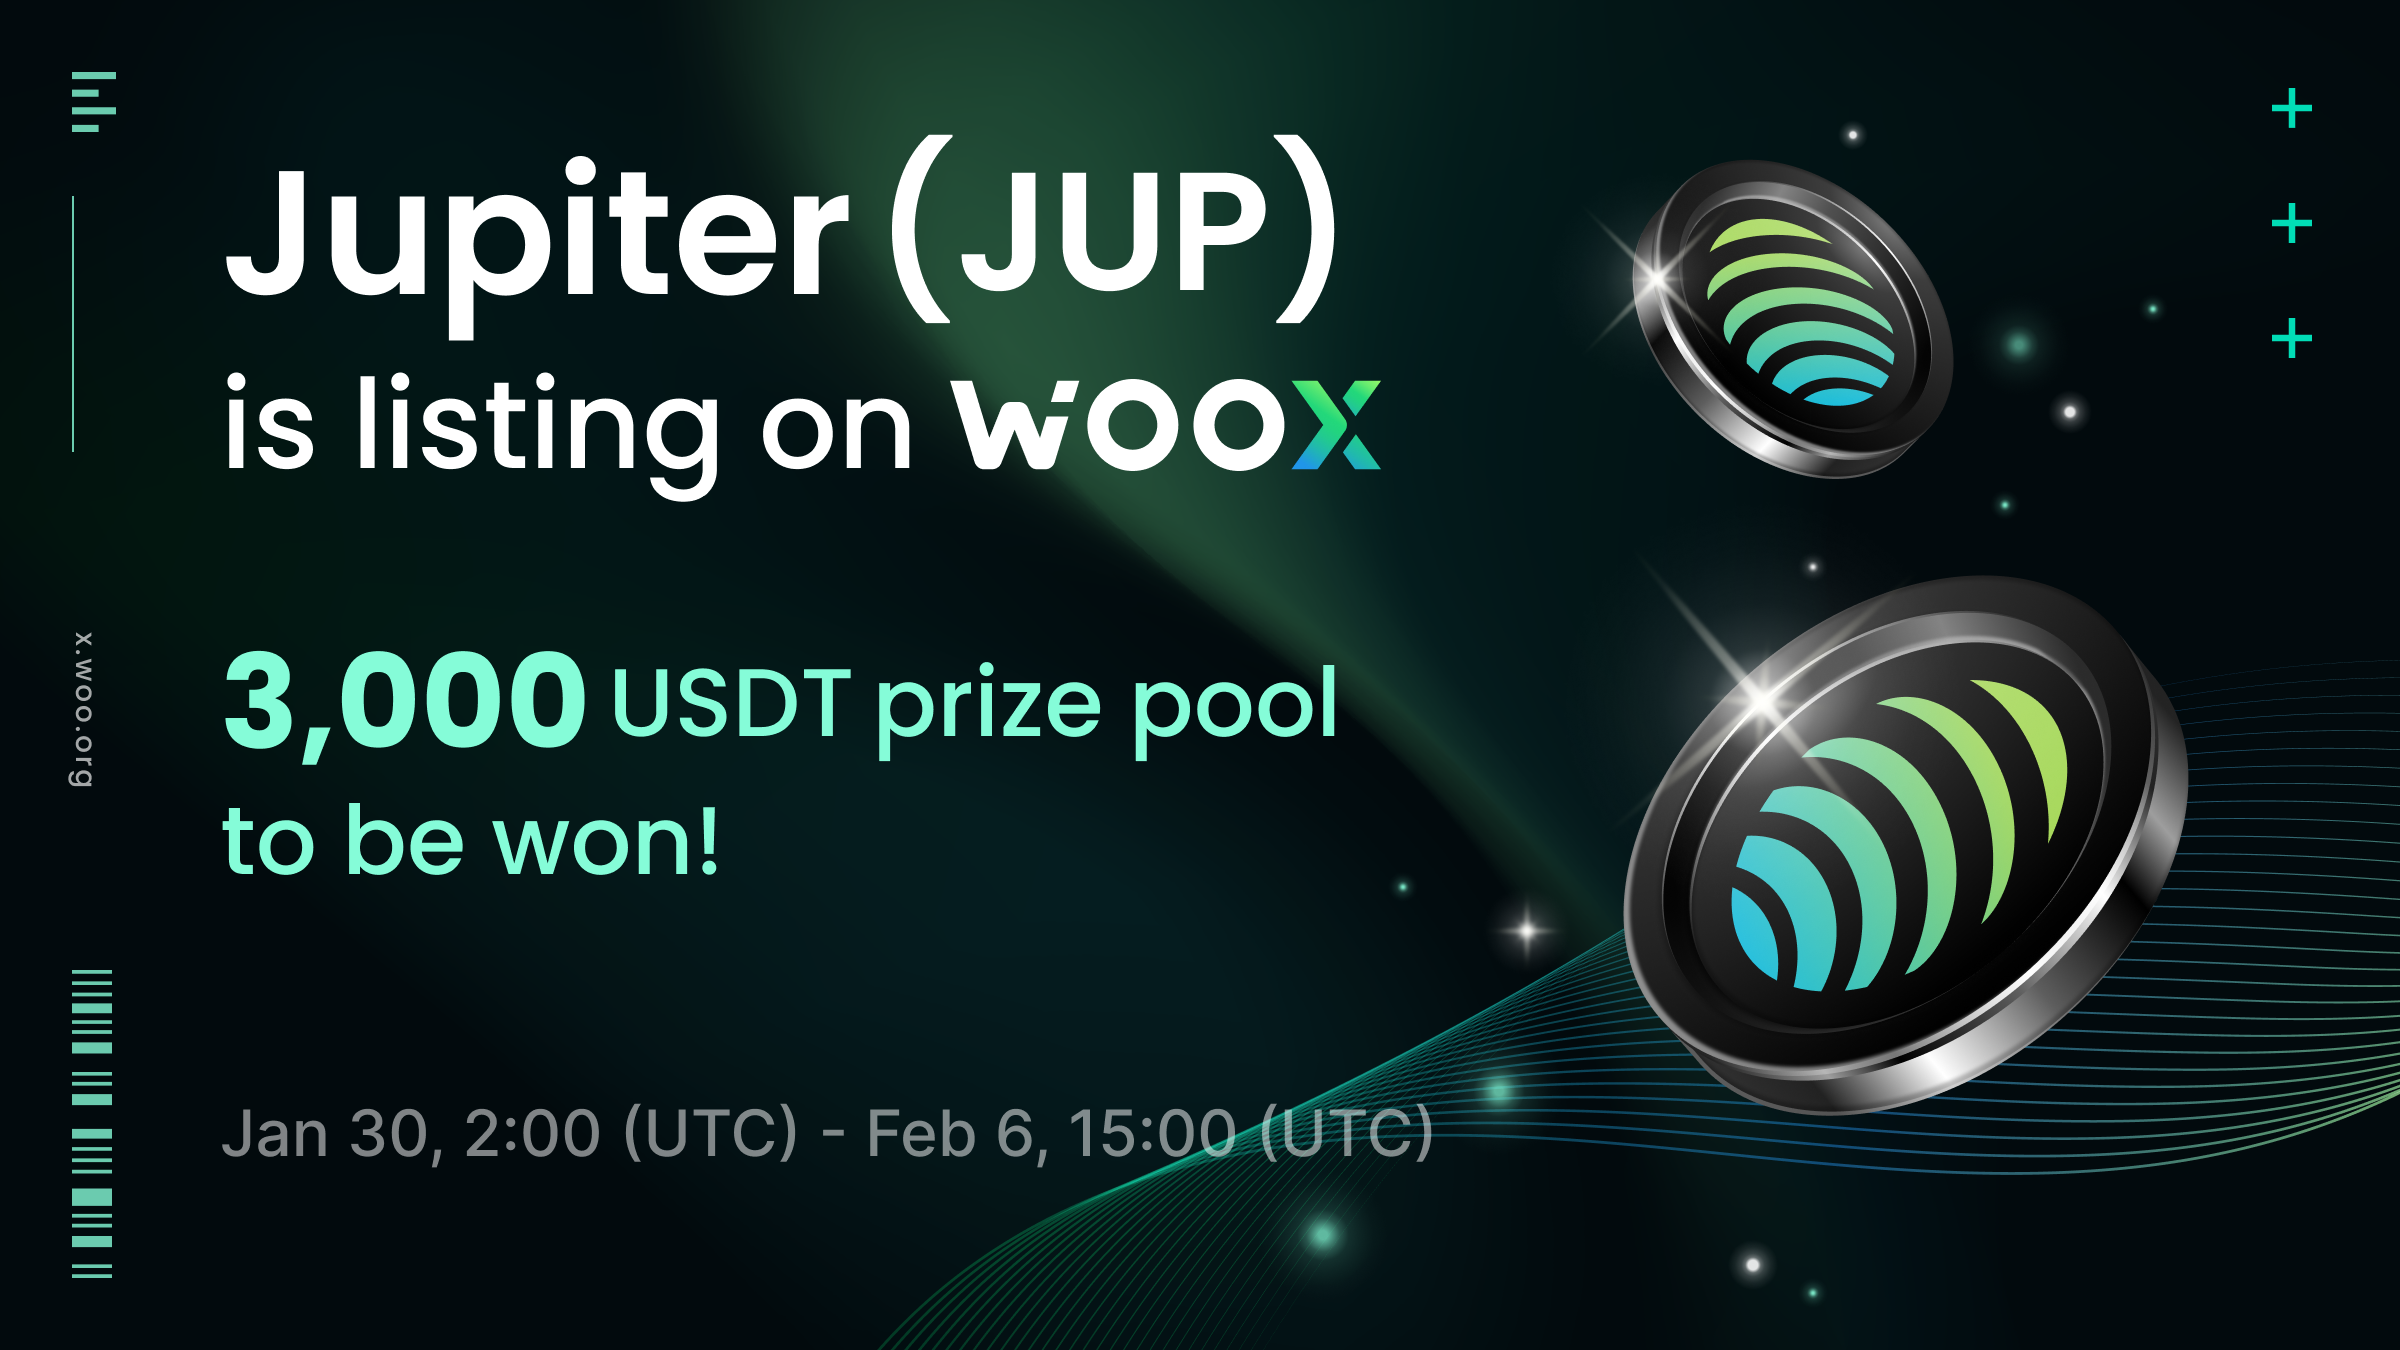 New Listing: Jupiter (JUP) on WOO X - Trade and share a 3,000 USDT prize pool!